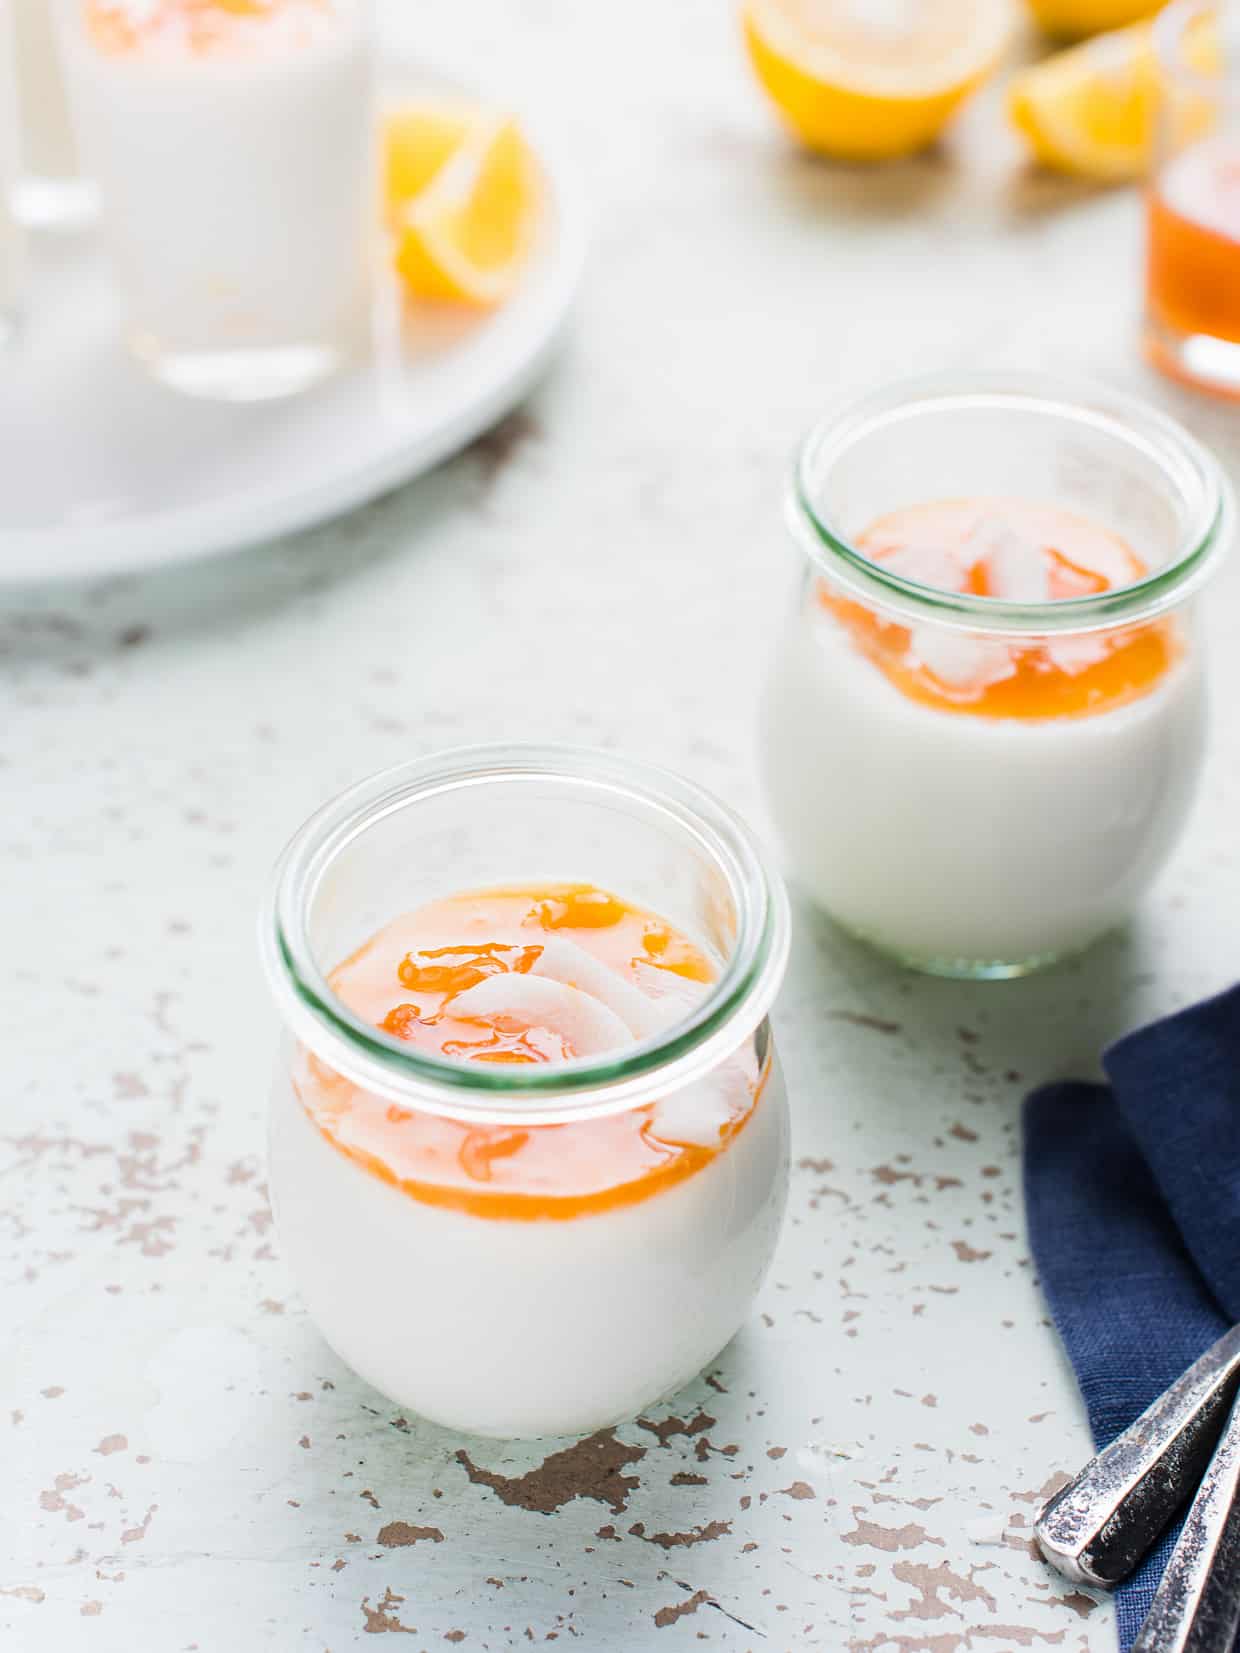 Panna cotta gets an update in this recipe for Meyer Lemon Coconut Panna Cotta using coconut milk. This elegant dessert is simple and easy for entertaining.